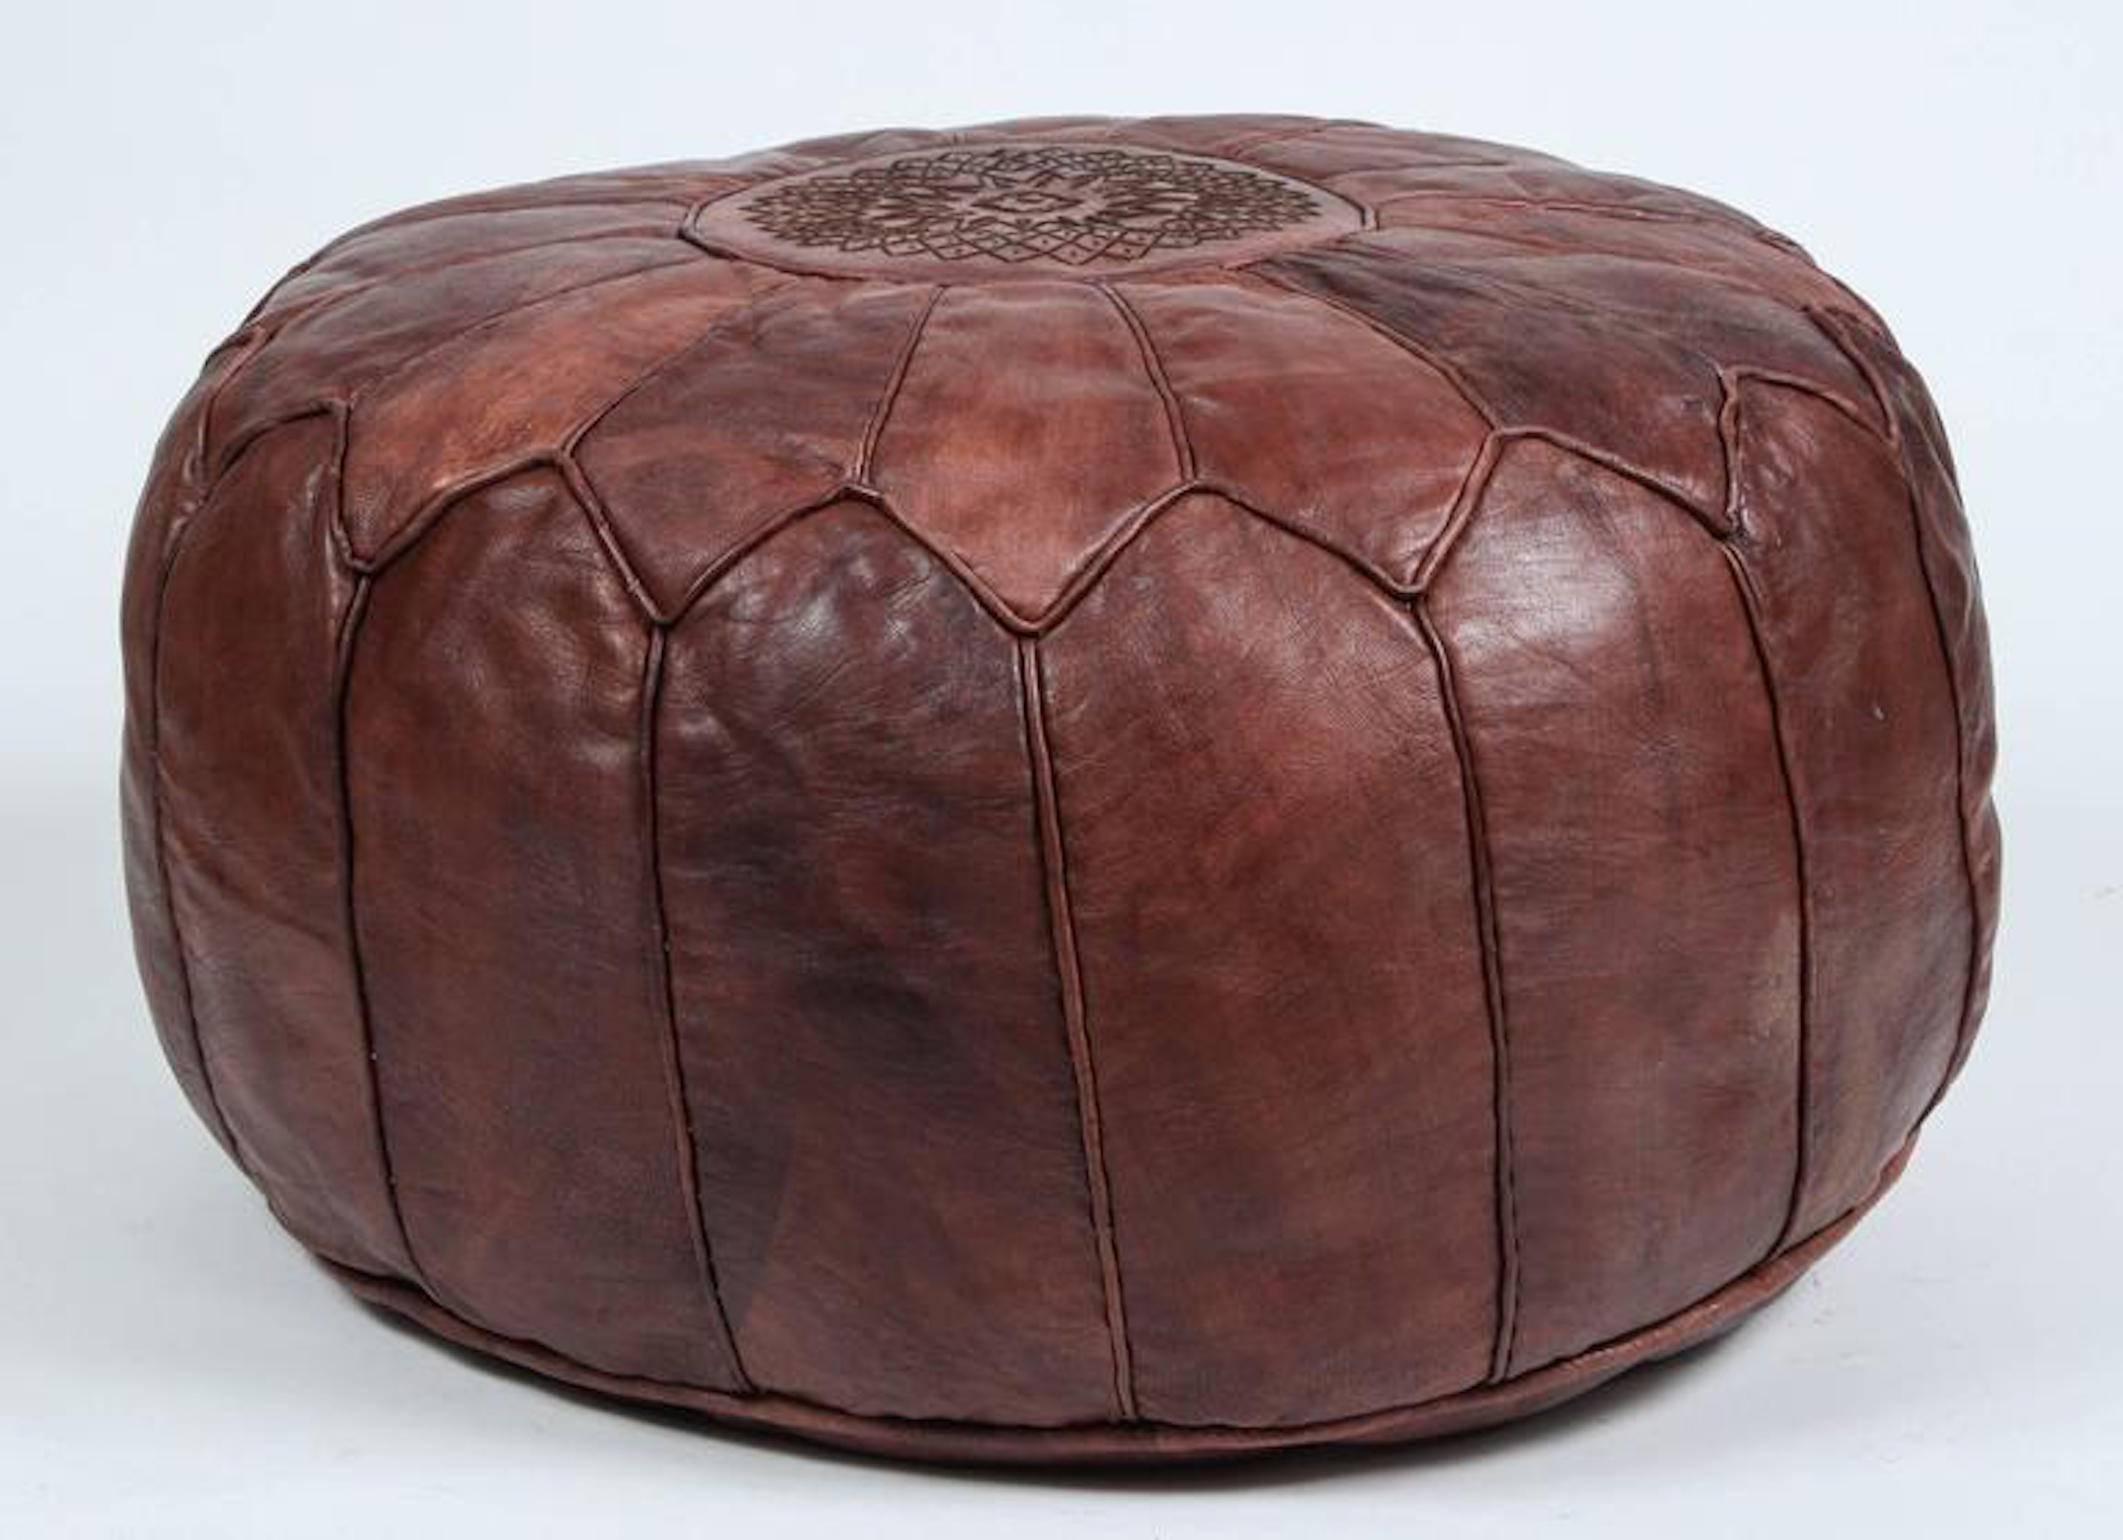 Brand New Stunning Moroccan Leather Ottoman Pouffe Pouf Footstool Antique Brown 